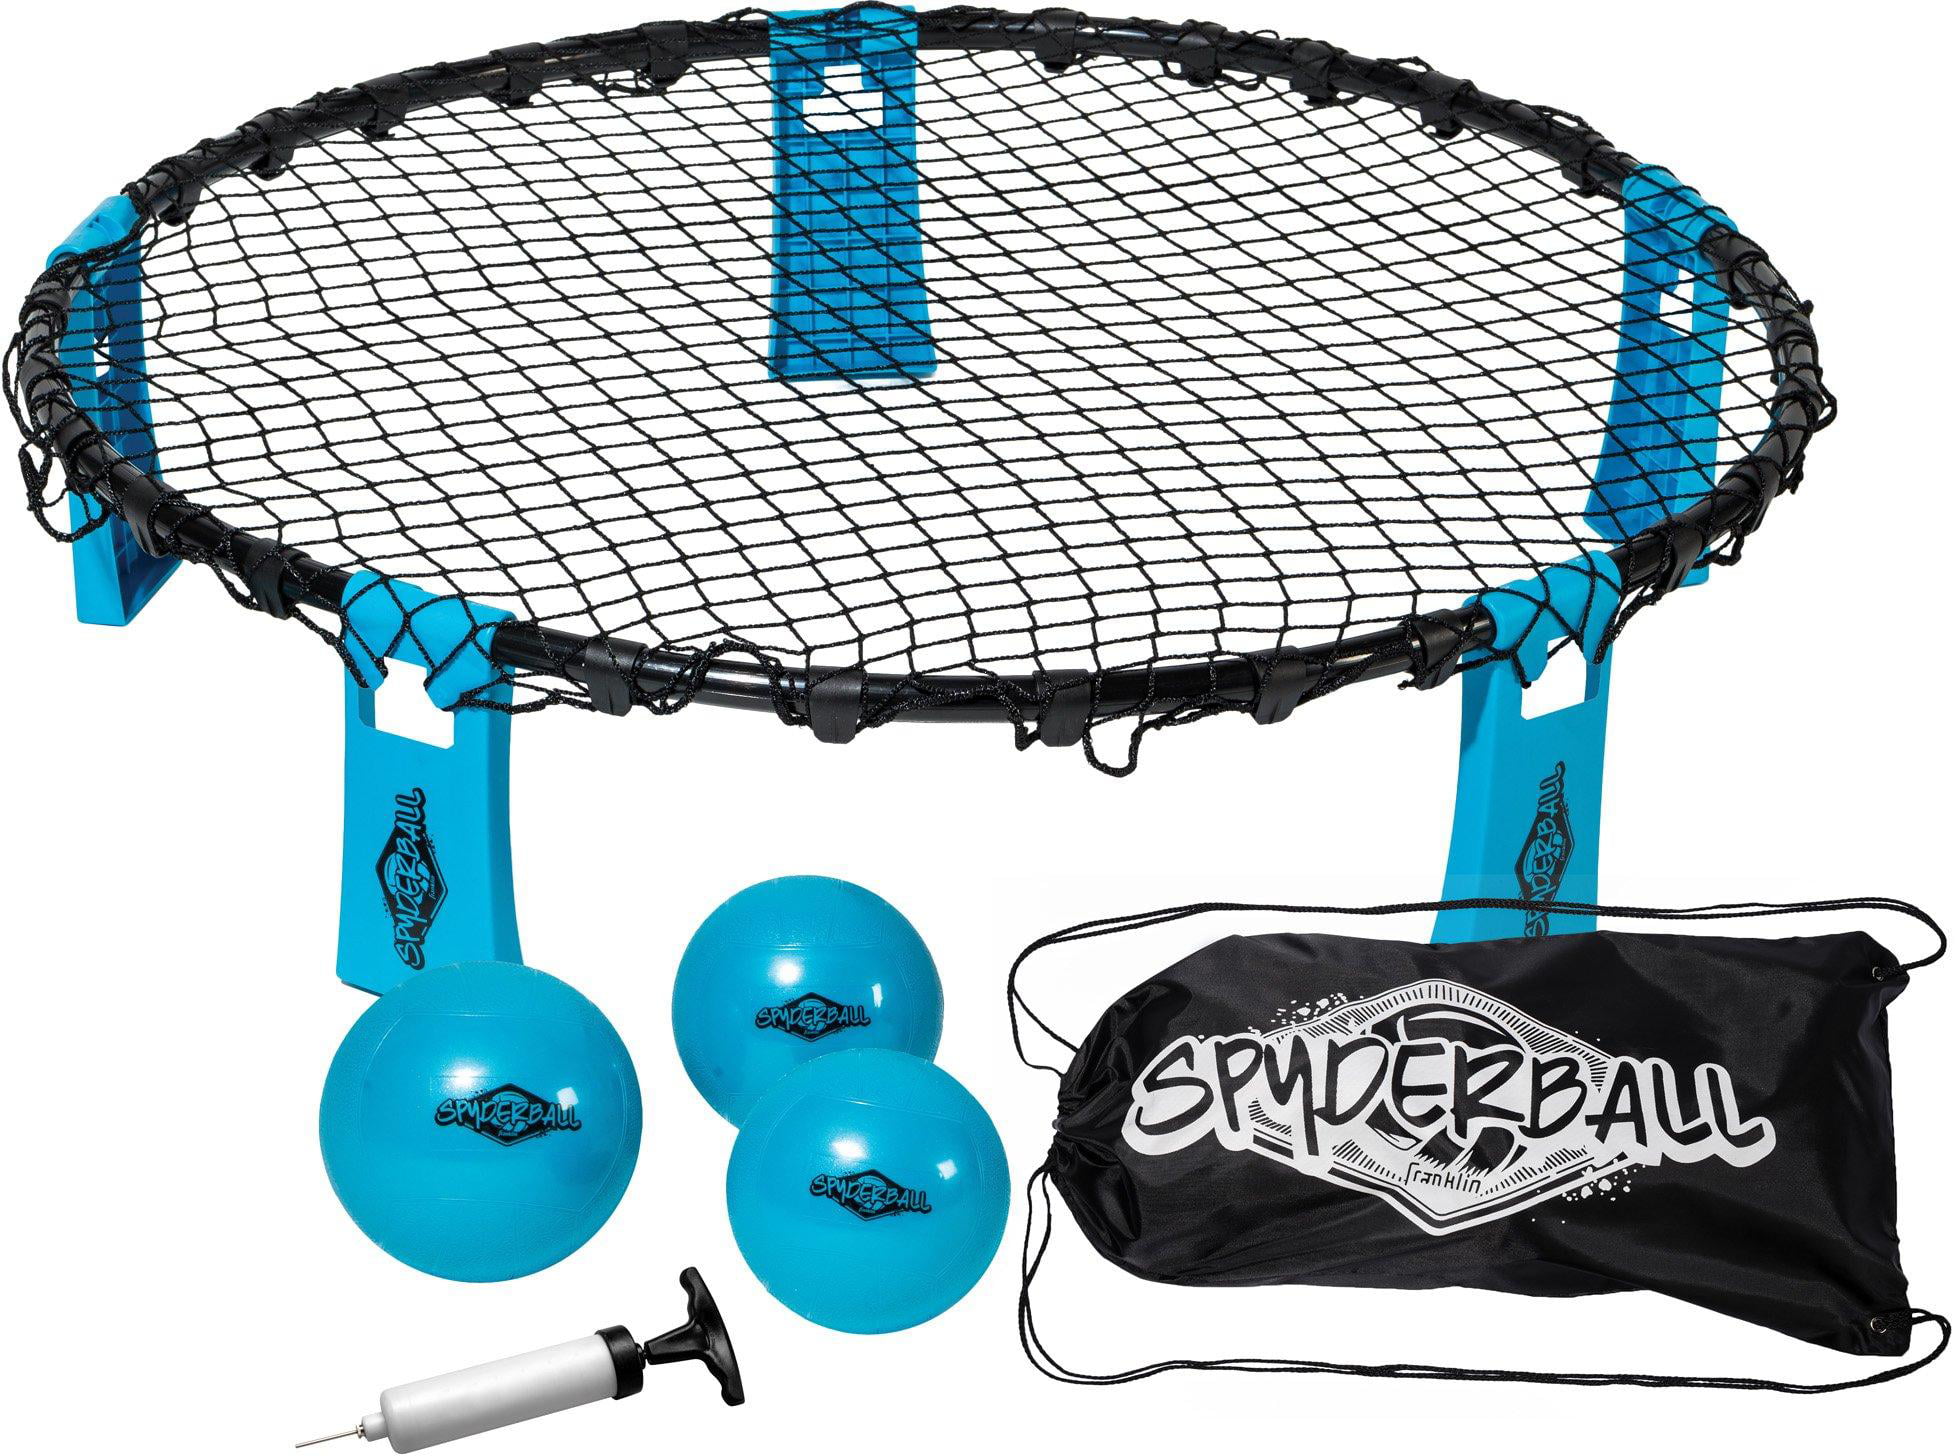 For Children and Adults at the Beach or in the House 3 Balls and Carrying Bag For Playing in the Park or Garden Ocean 5 Spiderball Set Ball Game with Net